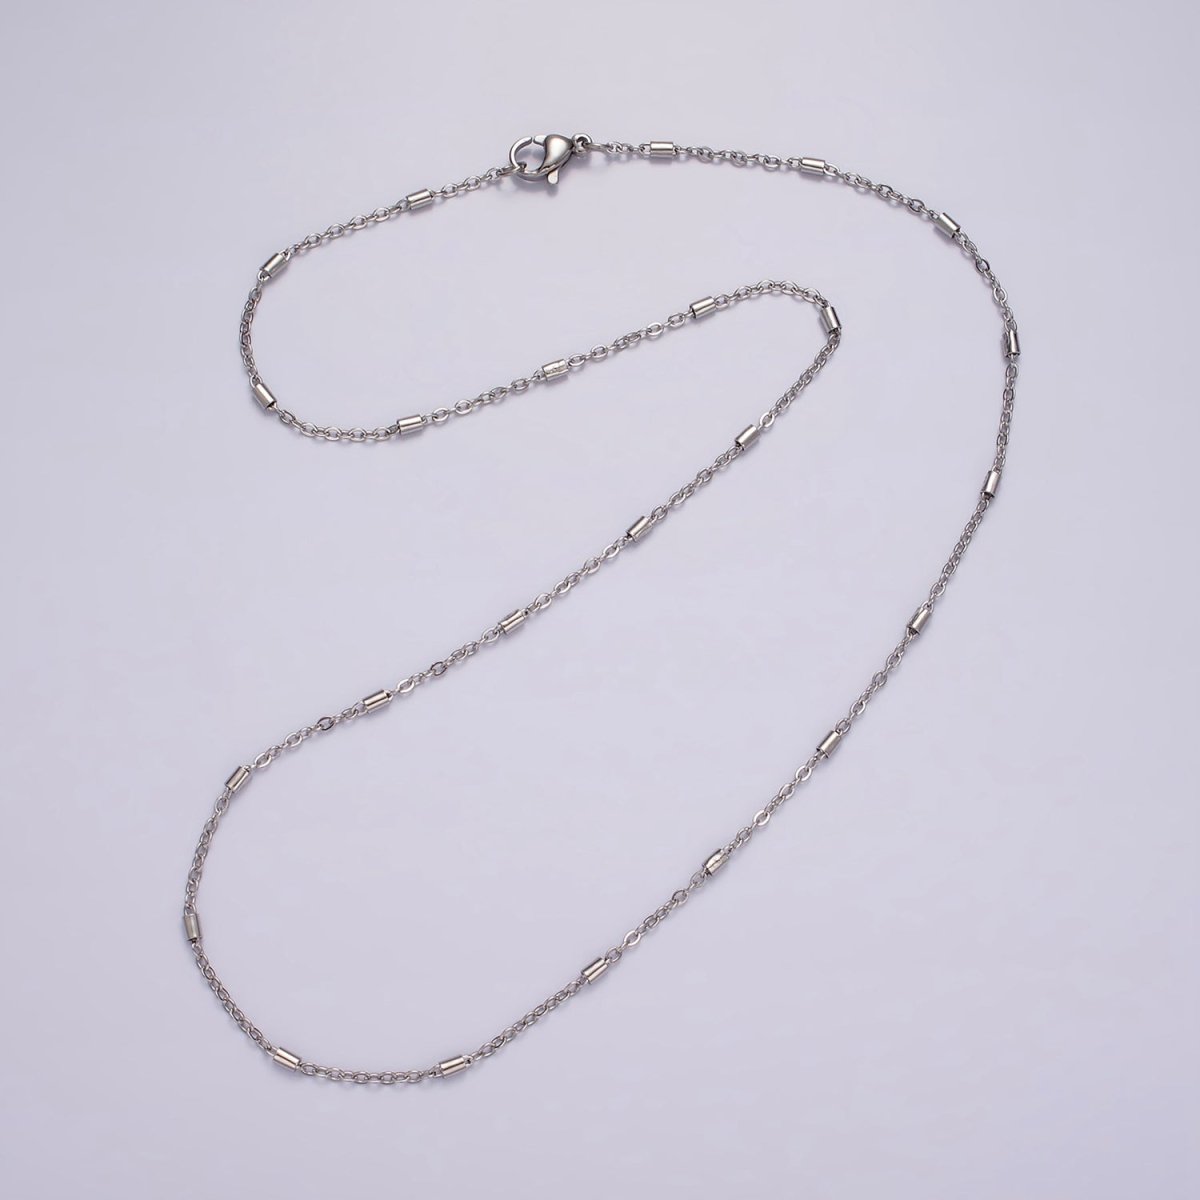 Dainty Tube Satellite Chain Necklace Stainless Steel 18 inch Tube cable Link Necklace in Silver | WA-2386 - DLUXCA